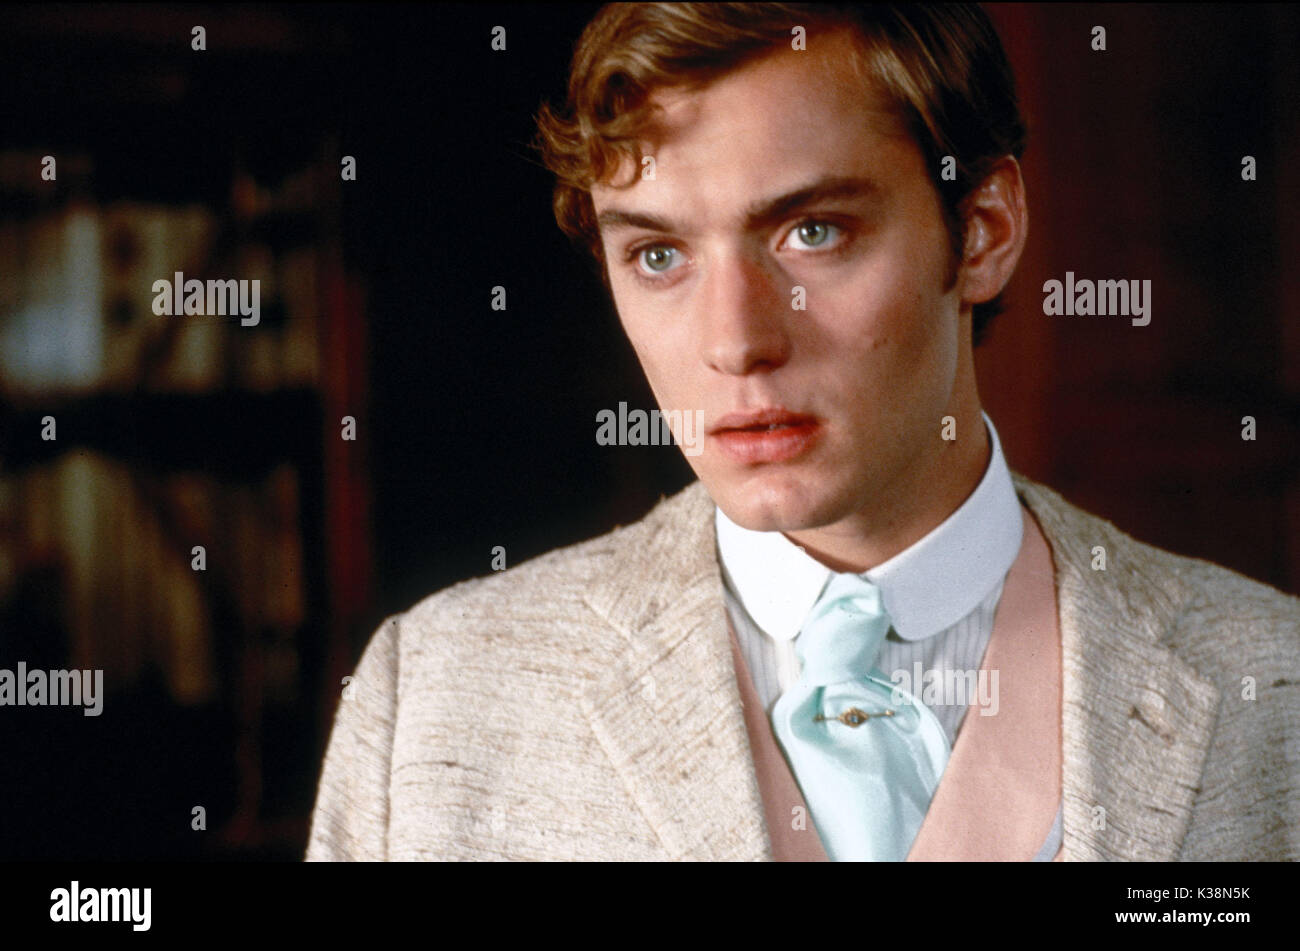 WILDE JUDE LAW as Lord Alfred Douglas      Date: 1997 Stock Photo